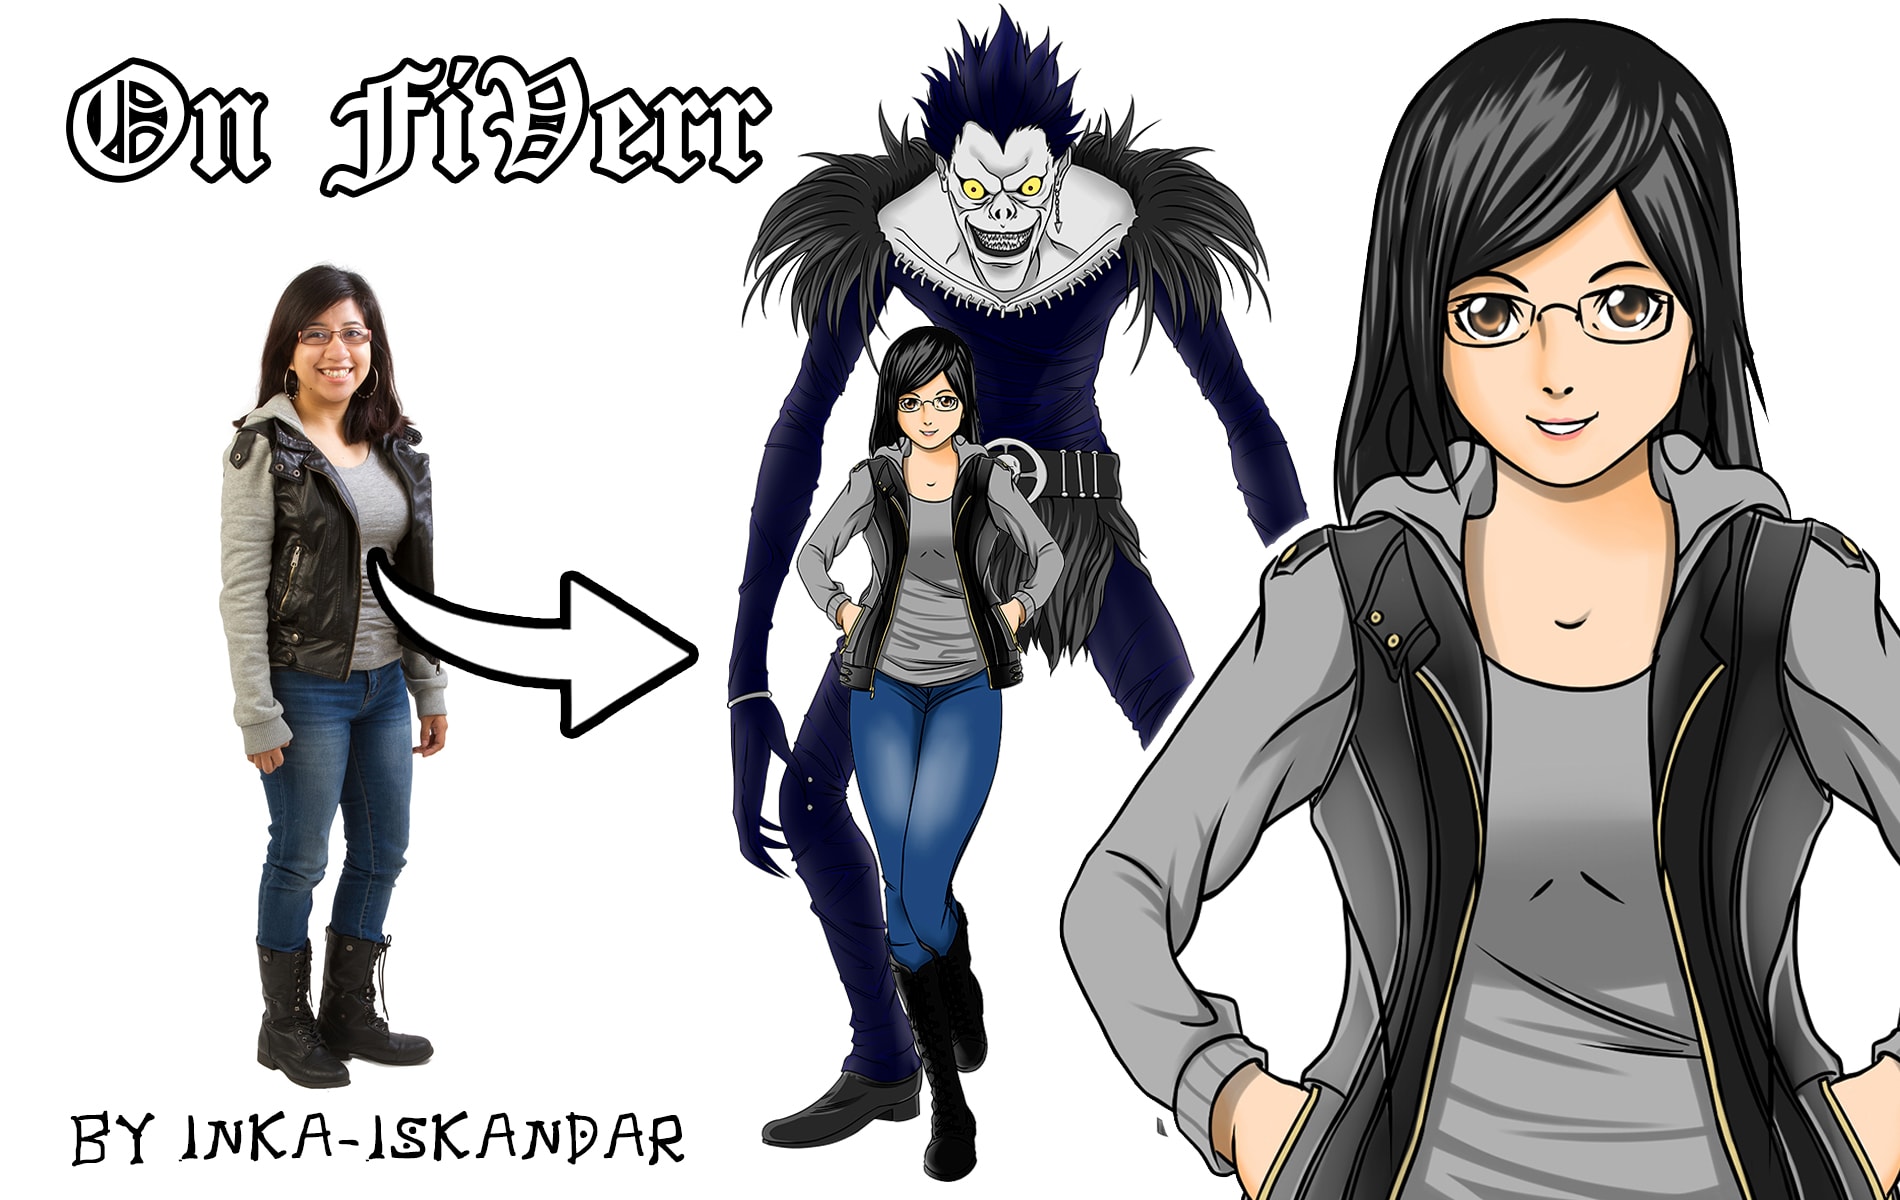 Draw you in death note manga anime style character with shinigami monster  by Inka_iskandar